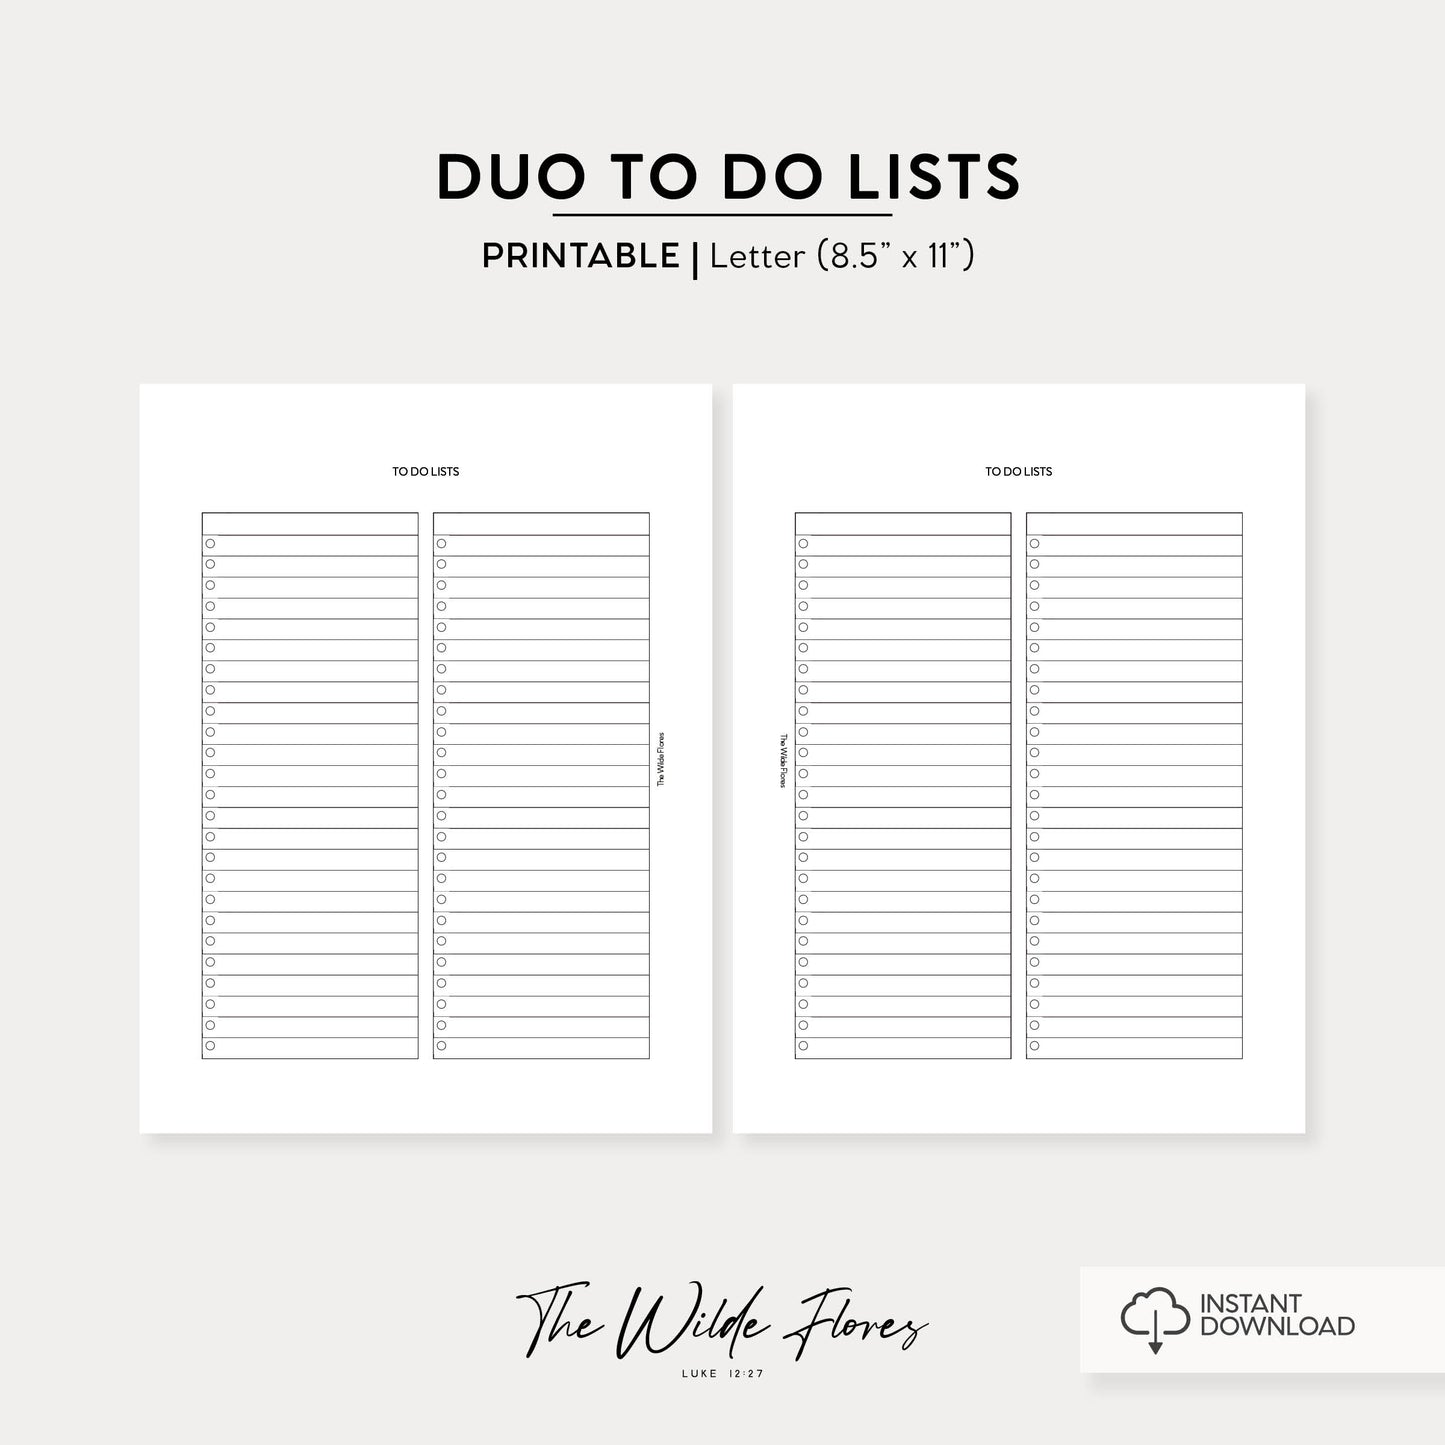 Duo To Do Lists: Letter Size Printable